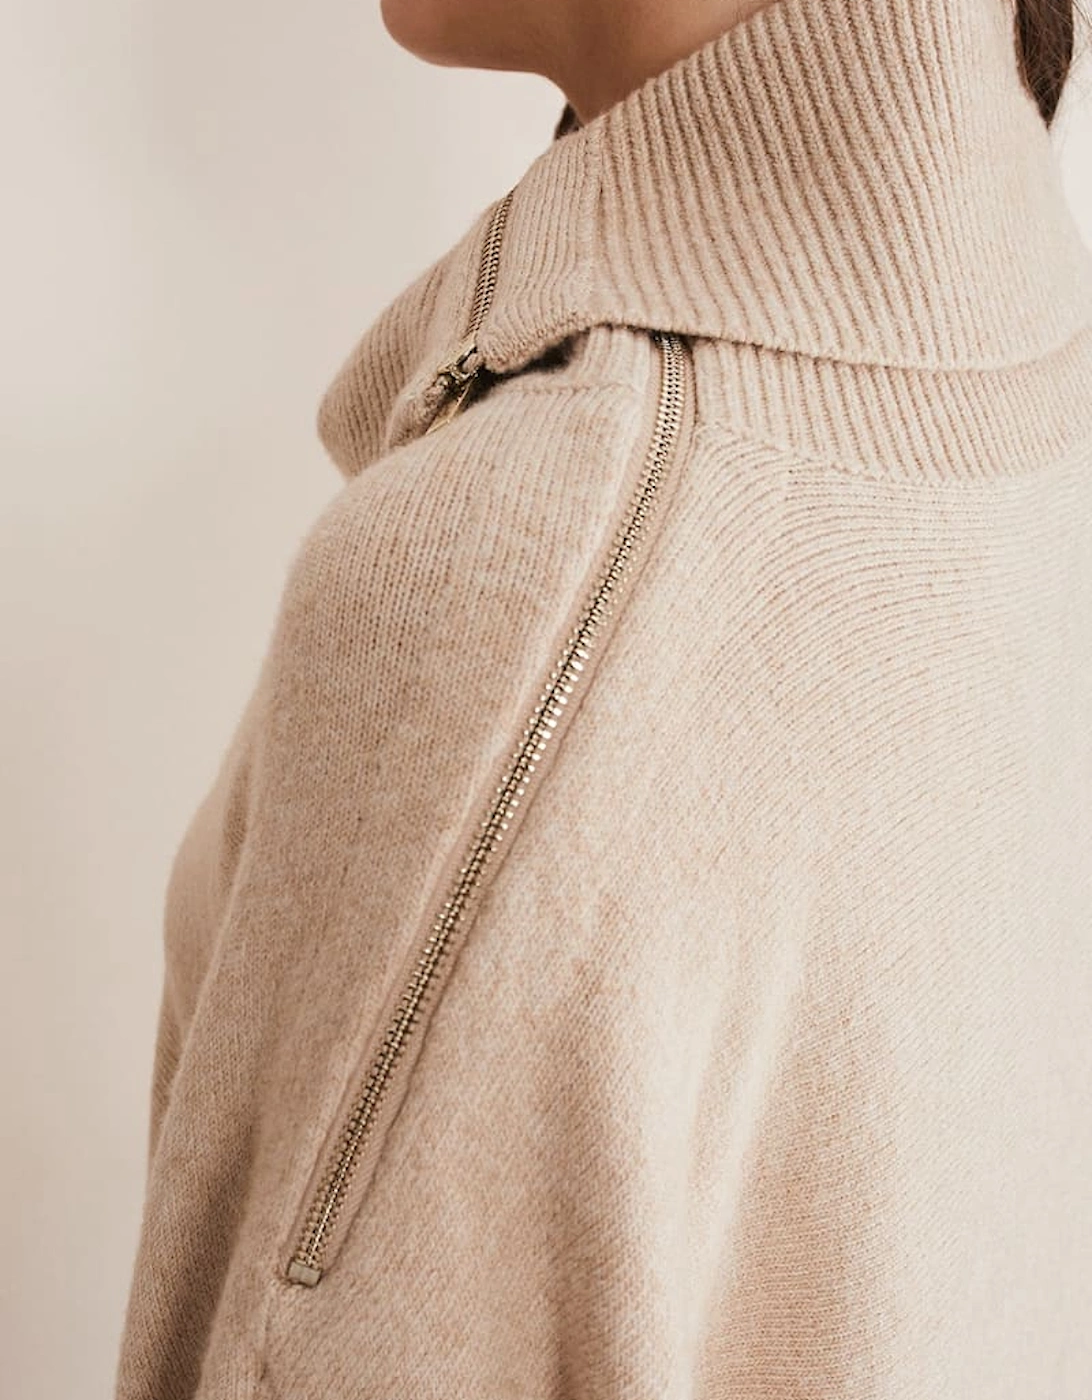 Nola Zip Neck Chunky Relaxed Knit